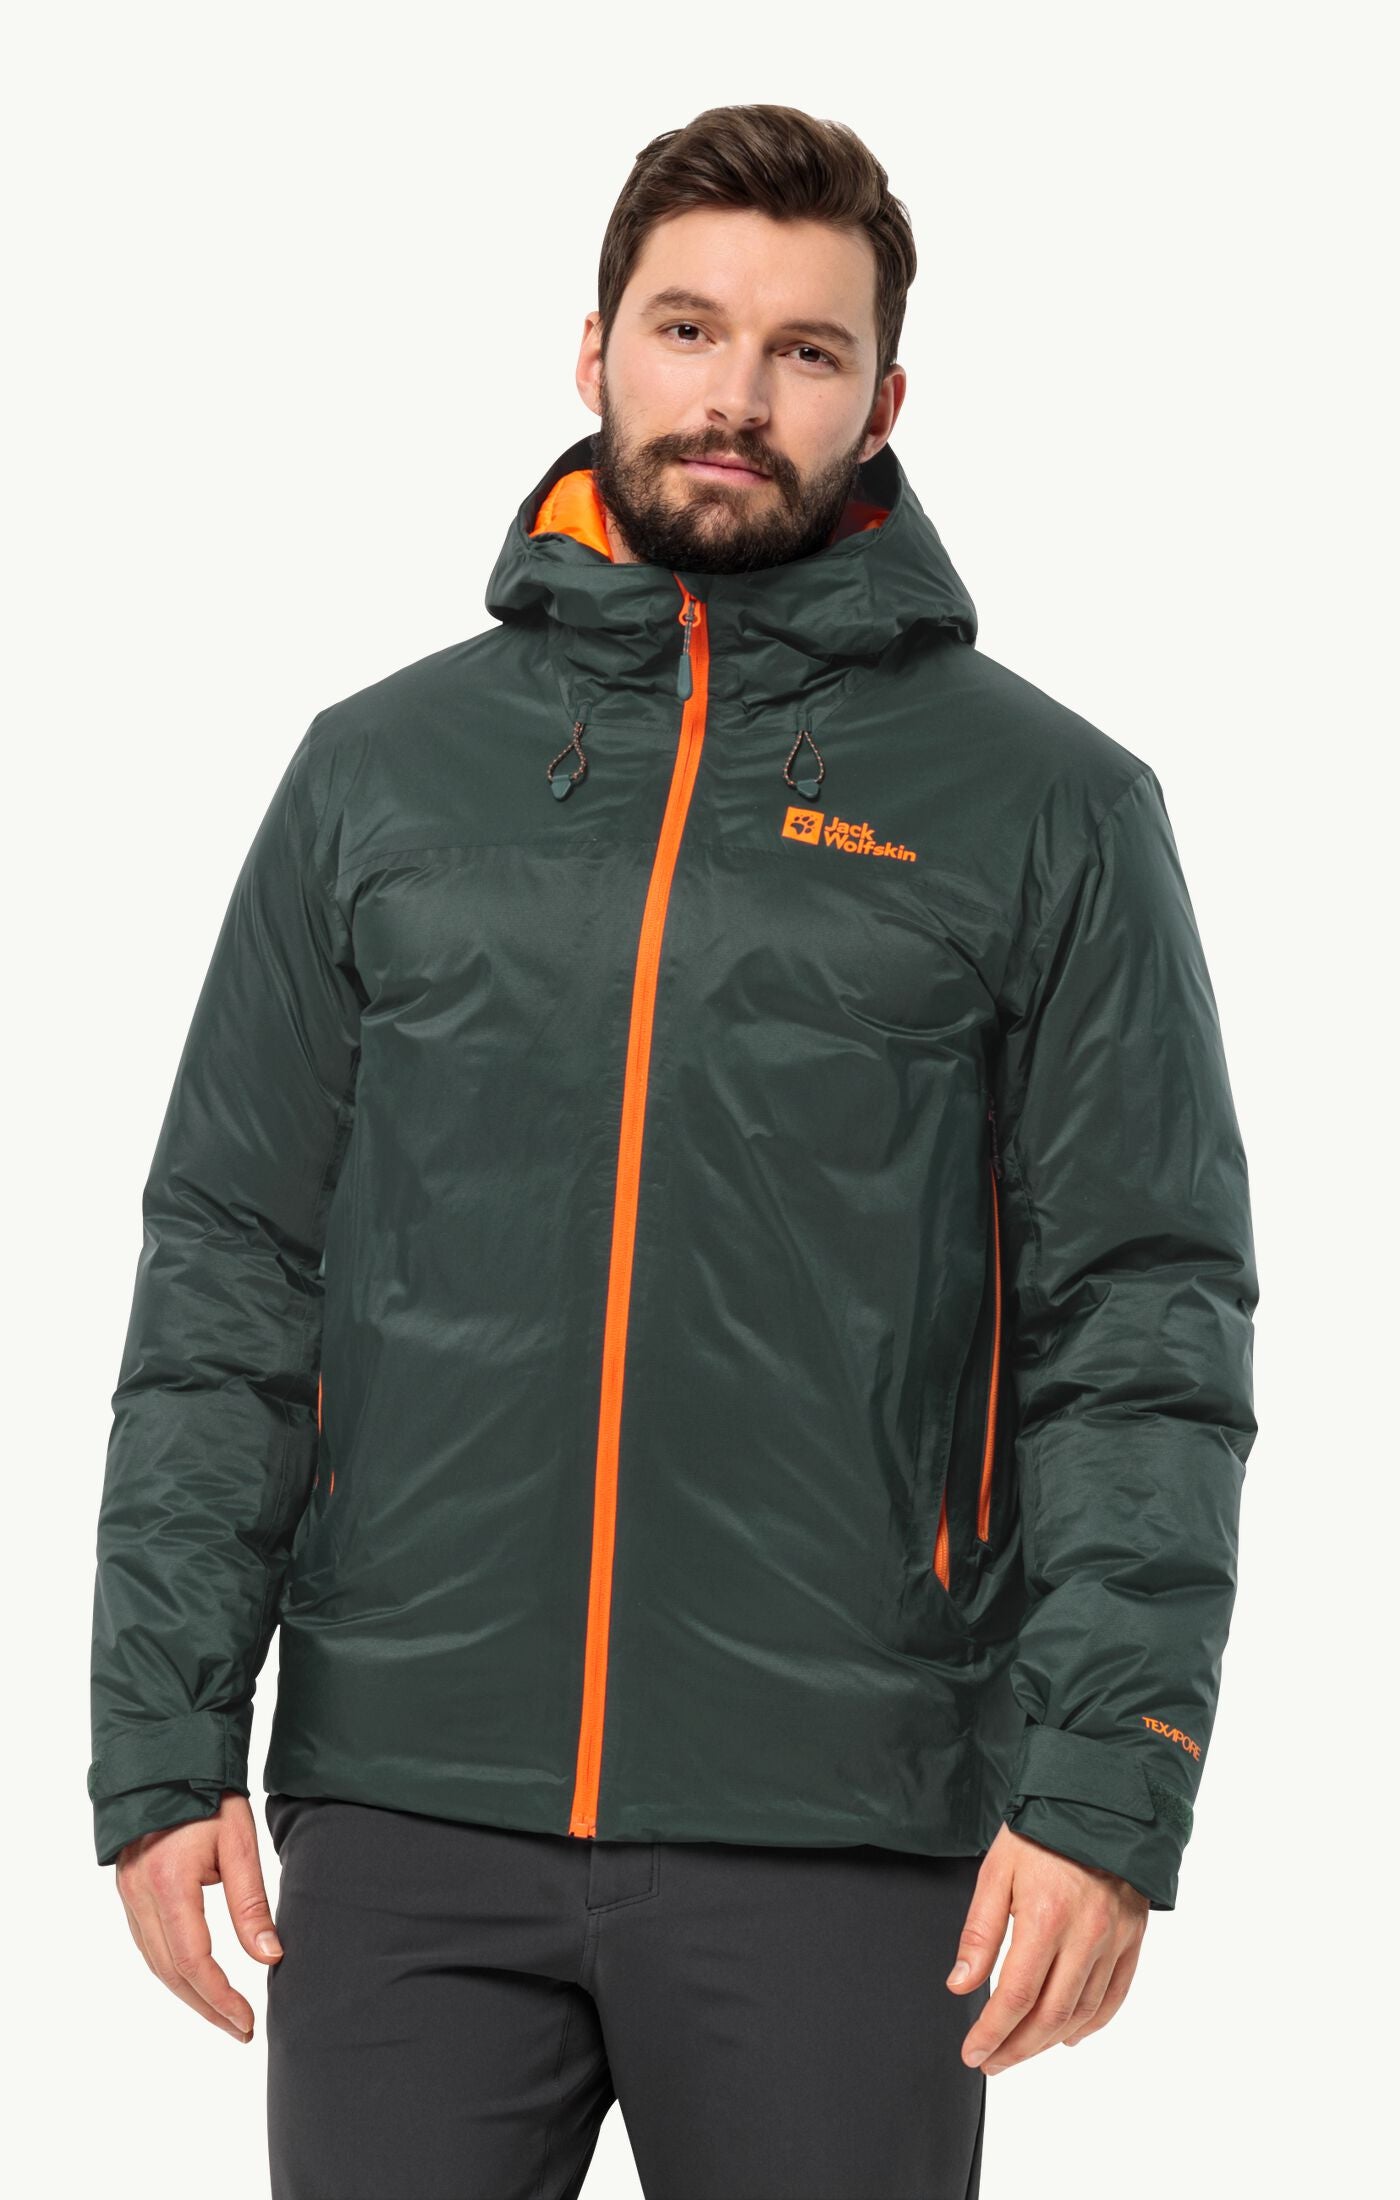 Jack & and Leisure jacket 2L – men\'s Cyrox Camping stylish BCH The versatile down Wolfskin